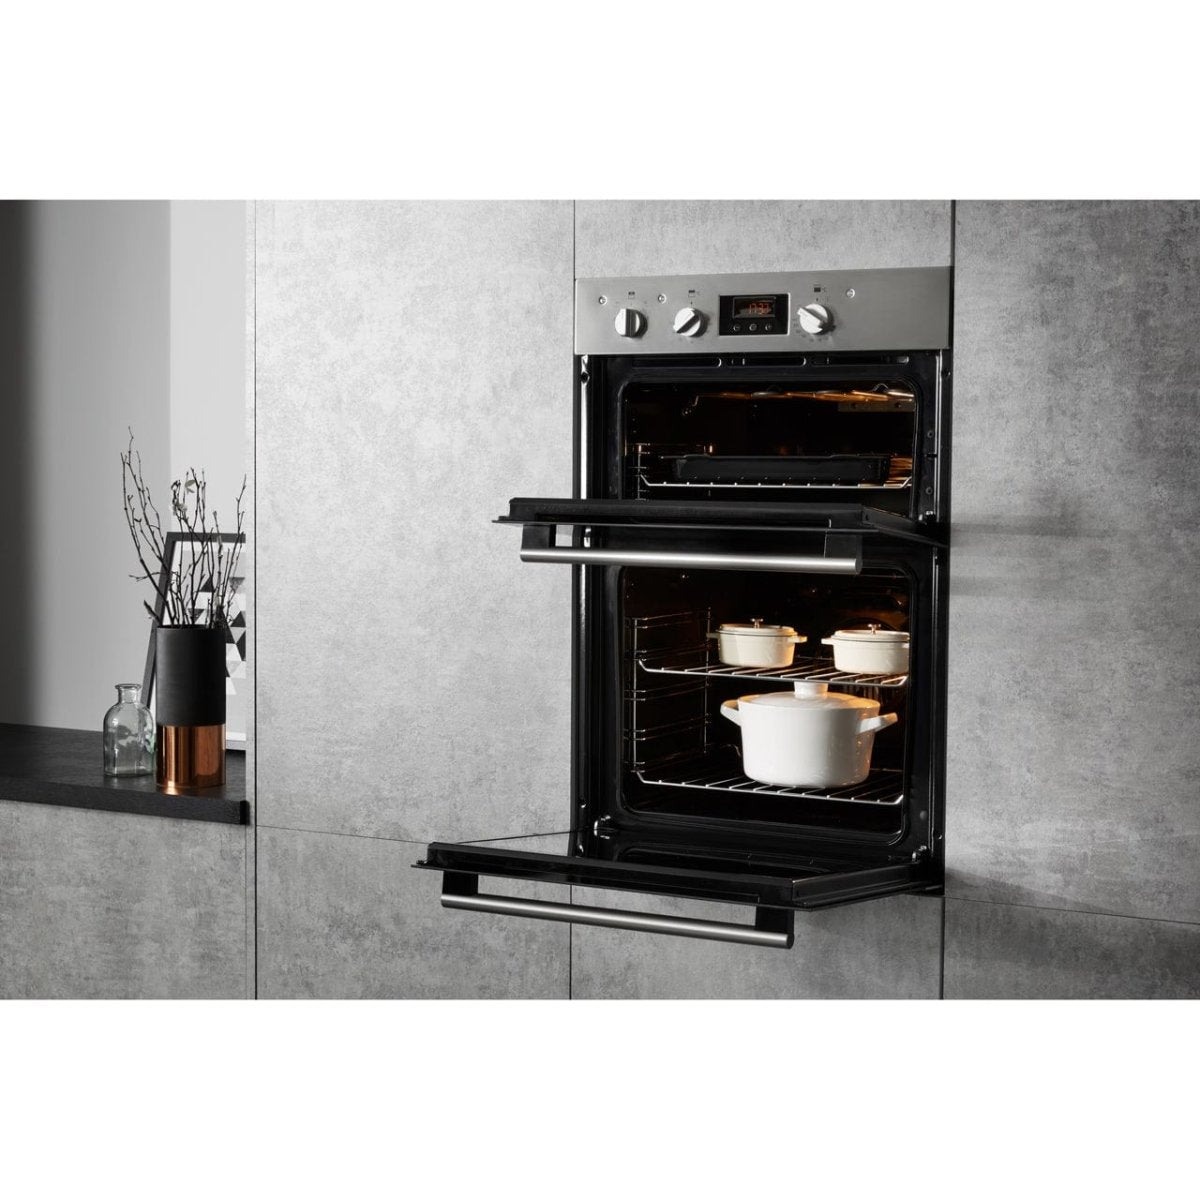 Hotpoint Class 2 DD2540IX Built In Electric Double Oven - Stainless Steel - A/A Rated | Atlantic Electrics